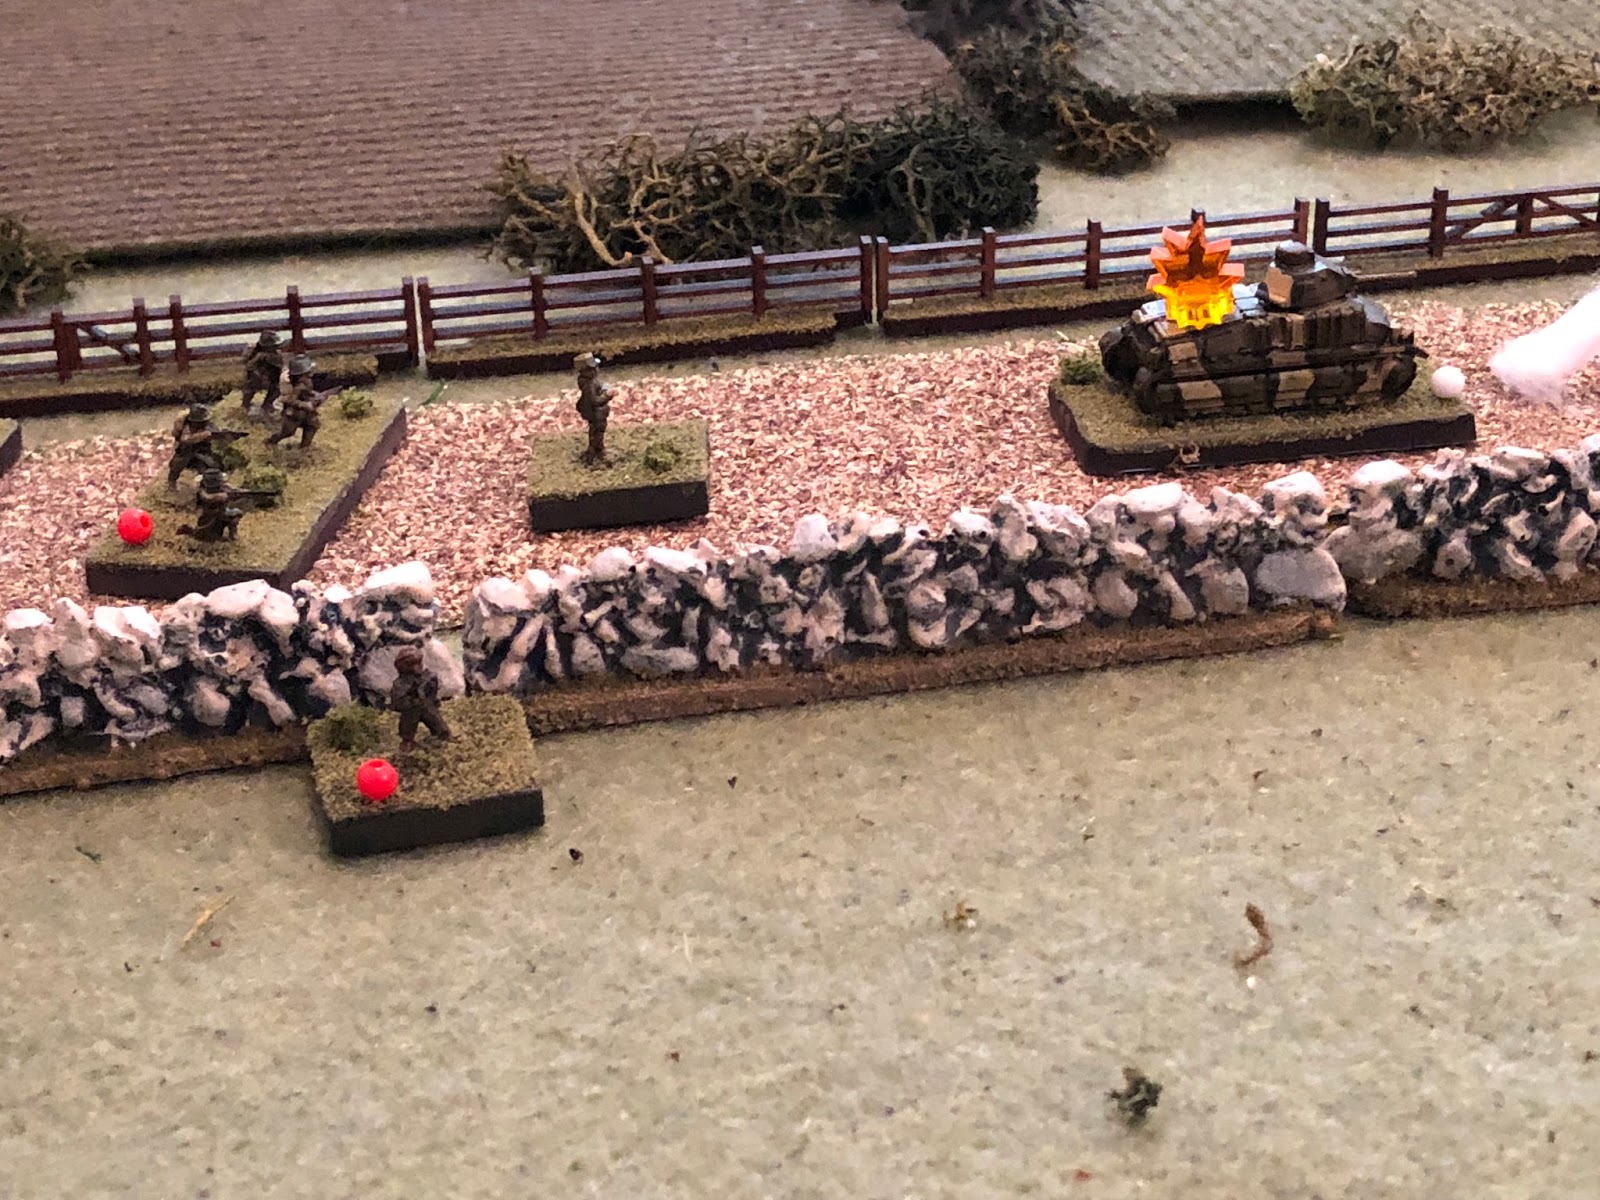  The French 2nd Platoon commander (center) is screaming at the bailed out crew to re-man their vehicle, but they are in no mood!&nbsp; The tank commander makes a vulgar gesture at the French Lieutenant, then he and his crew hop the wall and begin mov